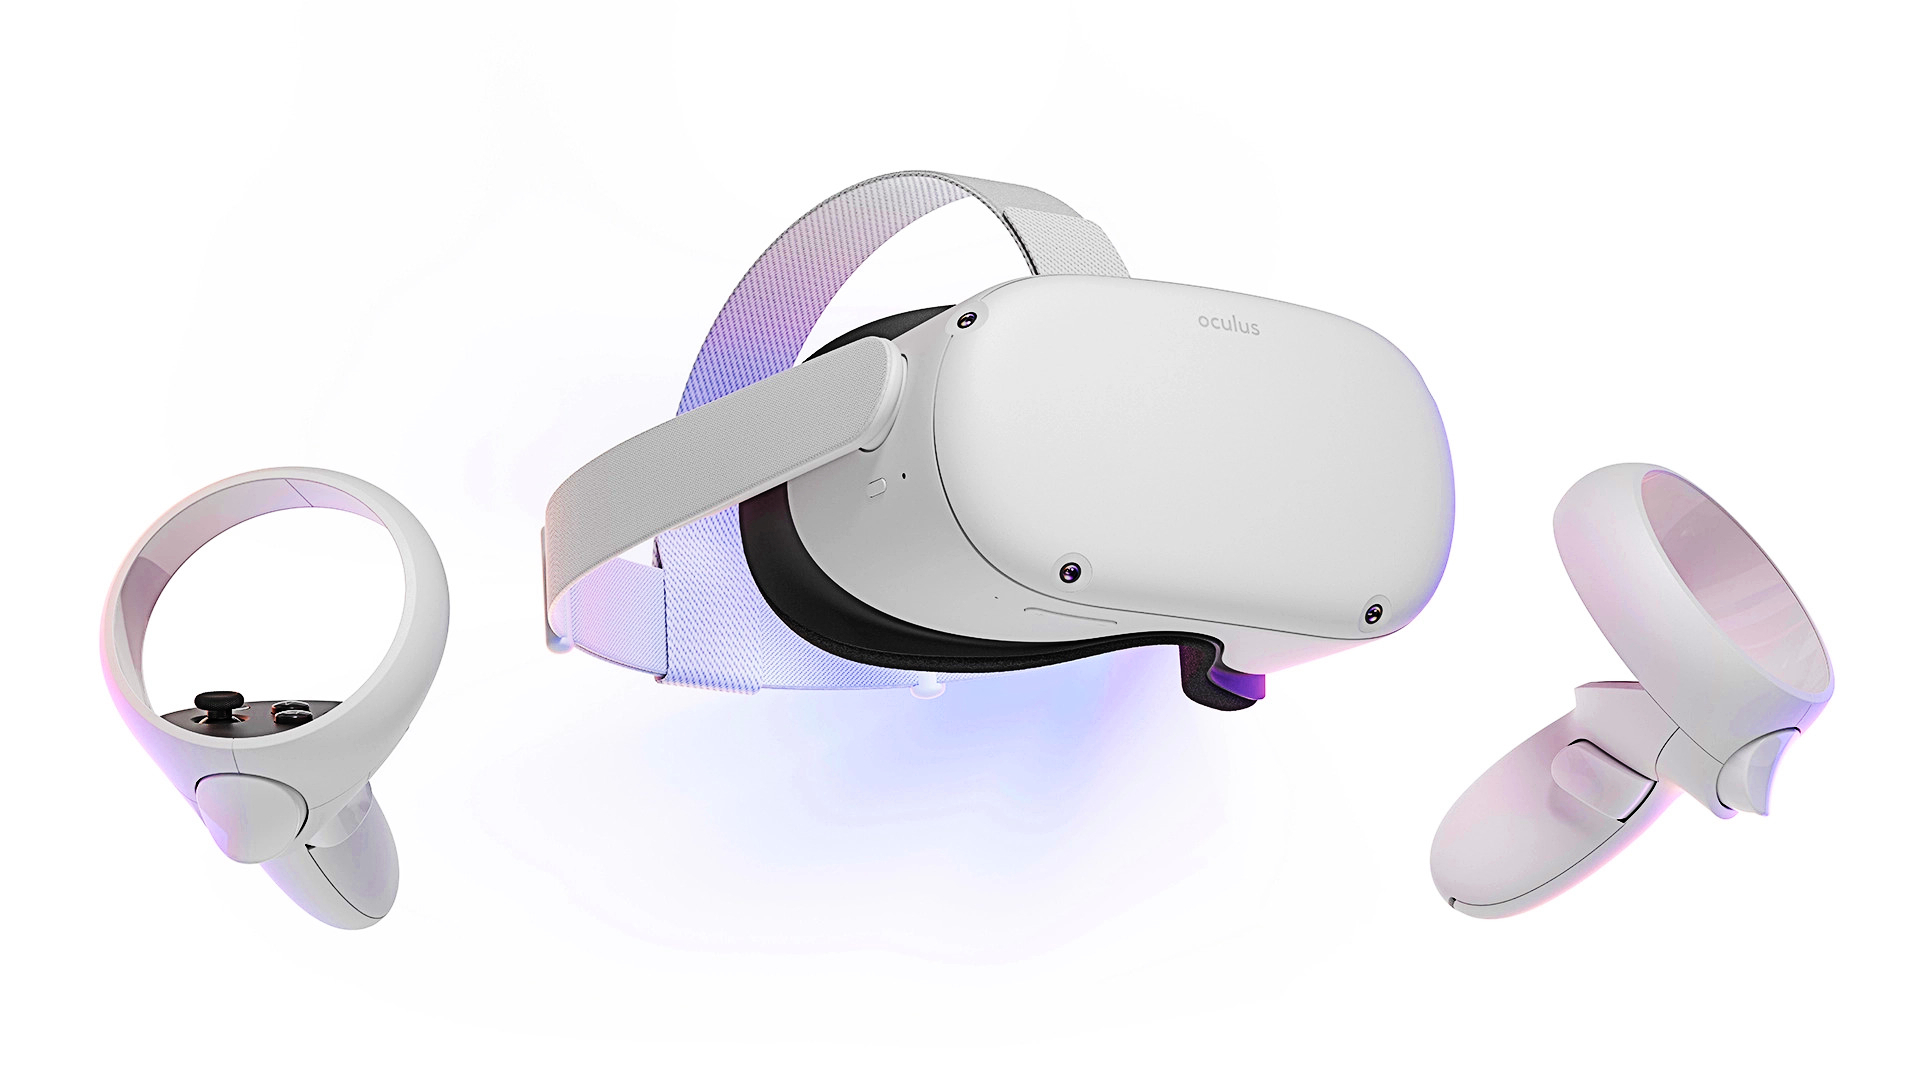 Oculus Quest 2 VR headset with controllers on white backdrop